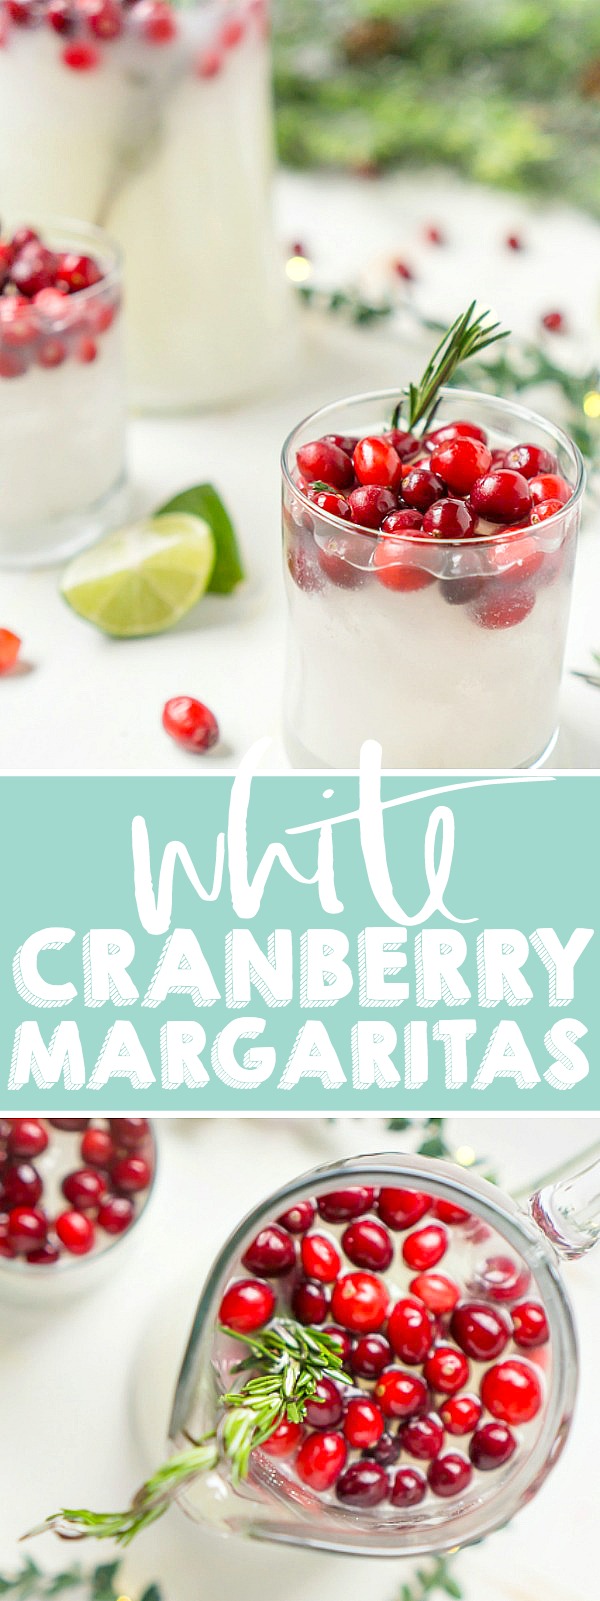 It's time for a new White Christmas cocktail! Sip on these White Cranberry Margaritas this holiday season and enjoy a smooth blend of coconut, cranberry and tequila. It's a smooth holiday cocktail recipe that everyone will love! | The Love Nerds #cranberrymargarita #holidaycocktail #christmasmargarita